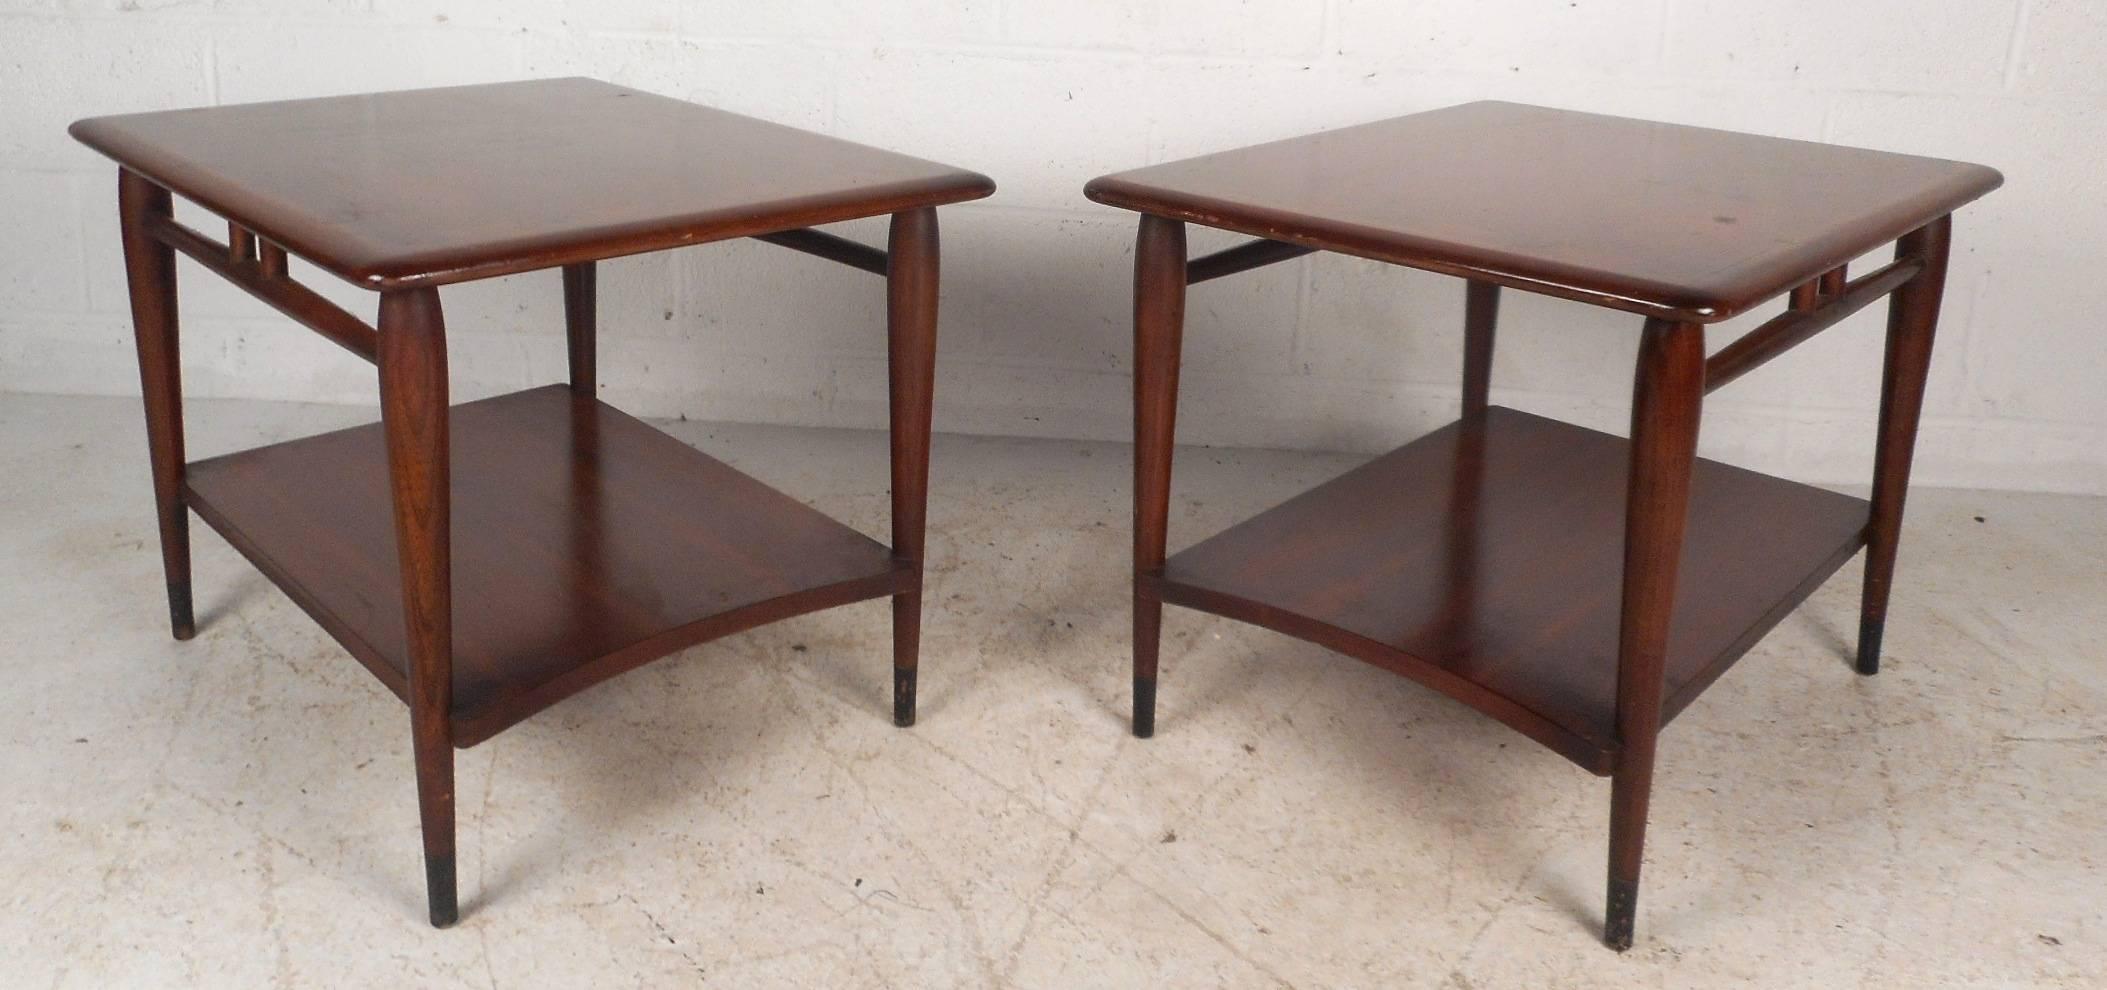 This gorgeous pair of vintage modern end tables feature a unique two-tone design with walnut and oakwood. Quality craftsmanship with spindle stretchers on each side and a curved lower shelf. Tapered legs, dovetail joints, and beautiful walnut wood